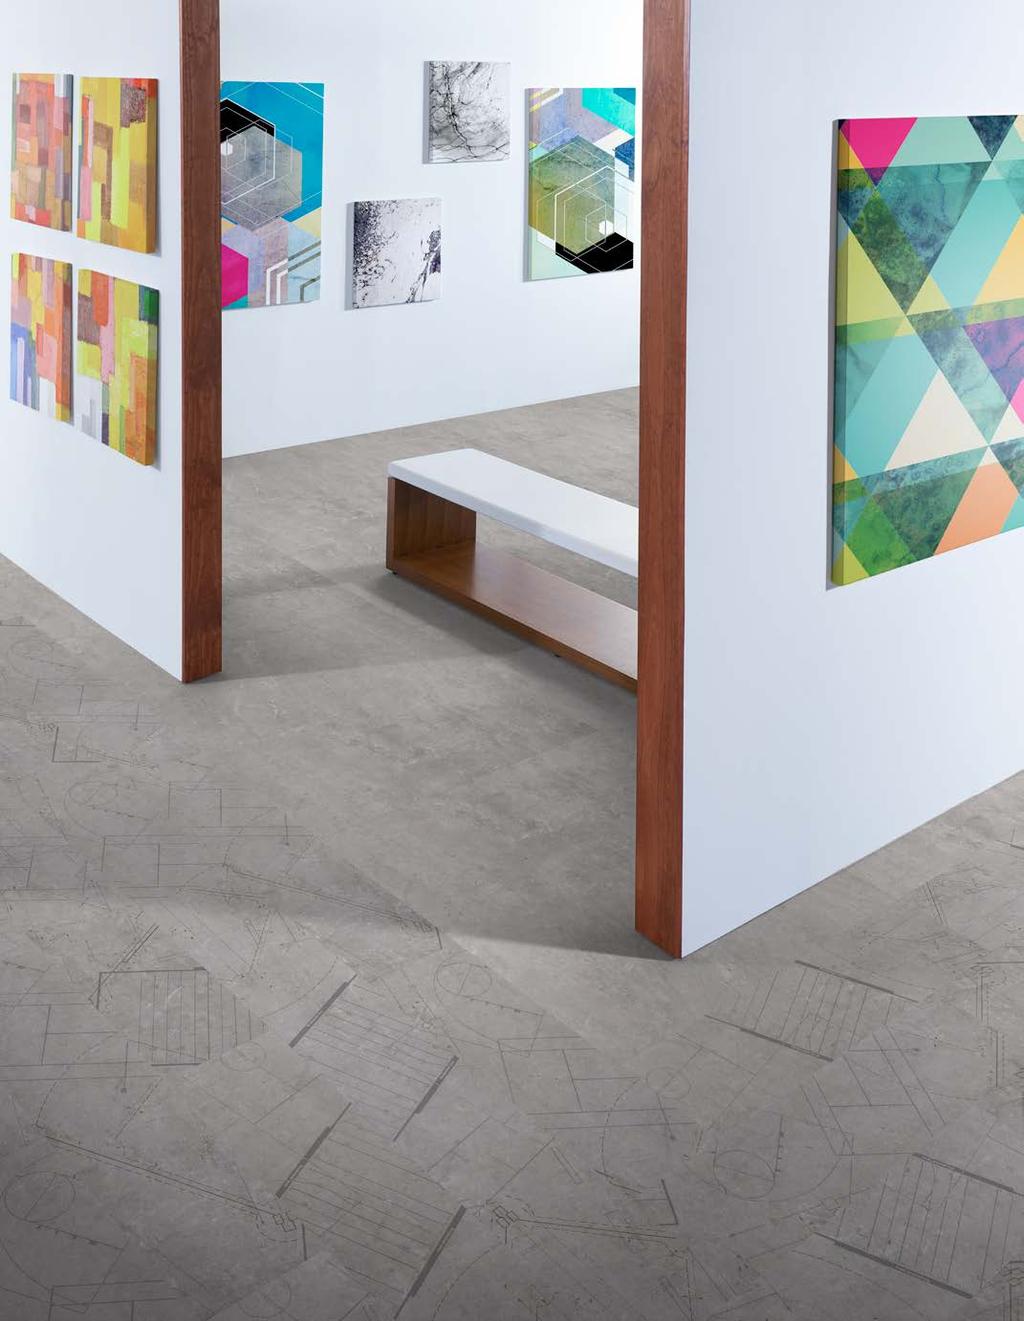 SM MILLIKEN LVT UNDERLAYMENT Made with high-density polyurethane foam Reduces floor noise by providing excellent sound absorption 100% recyclable and environmentally friendly Contains anti-microbial